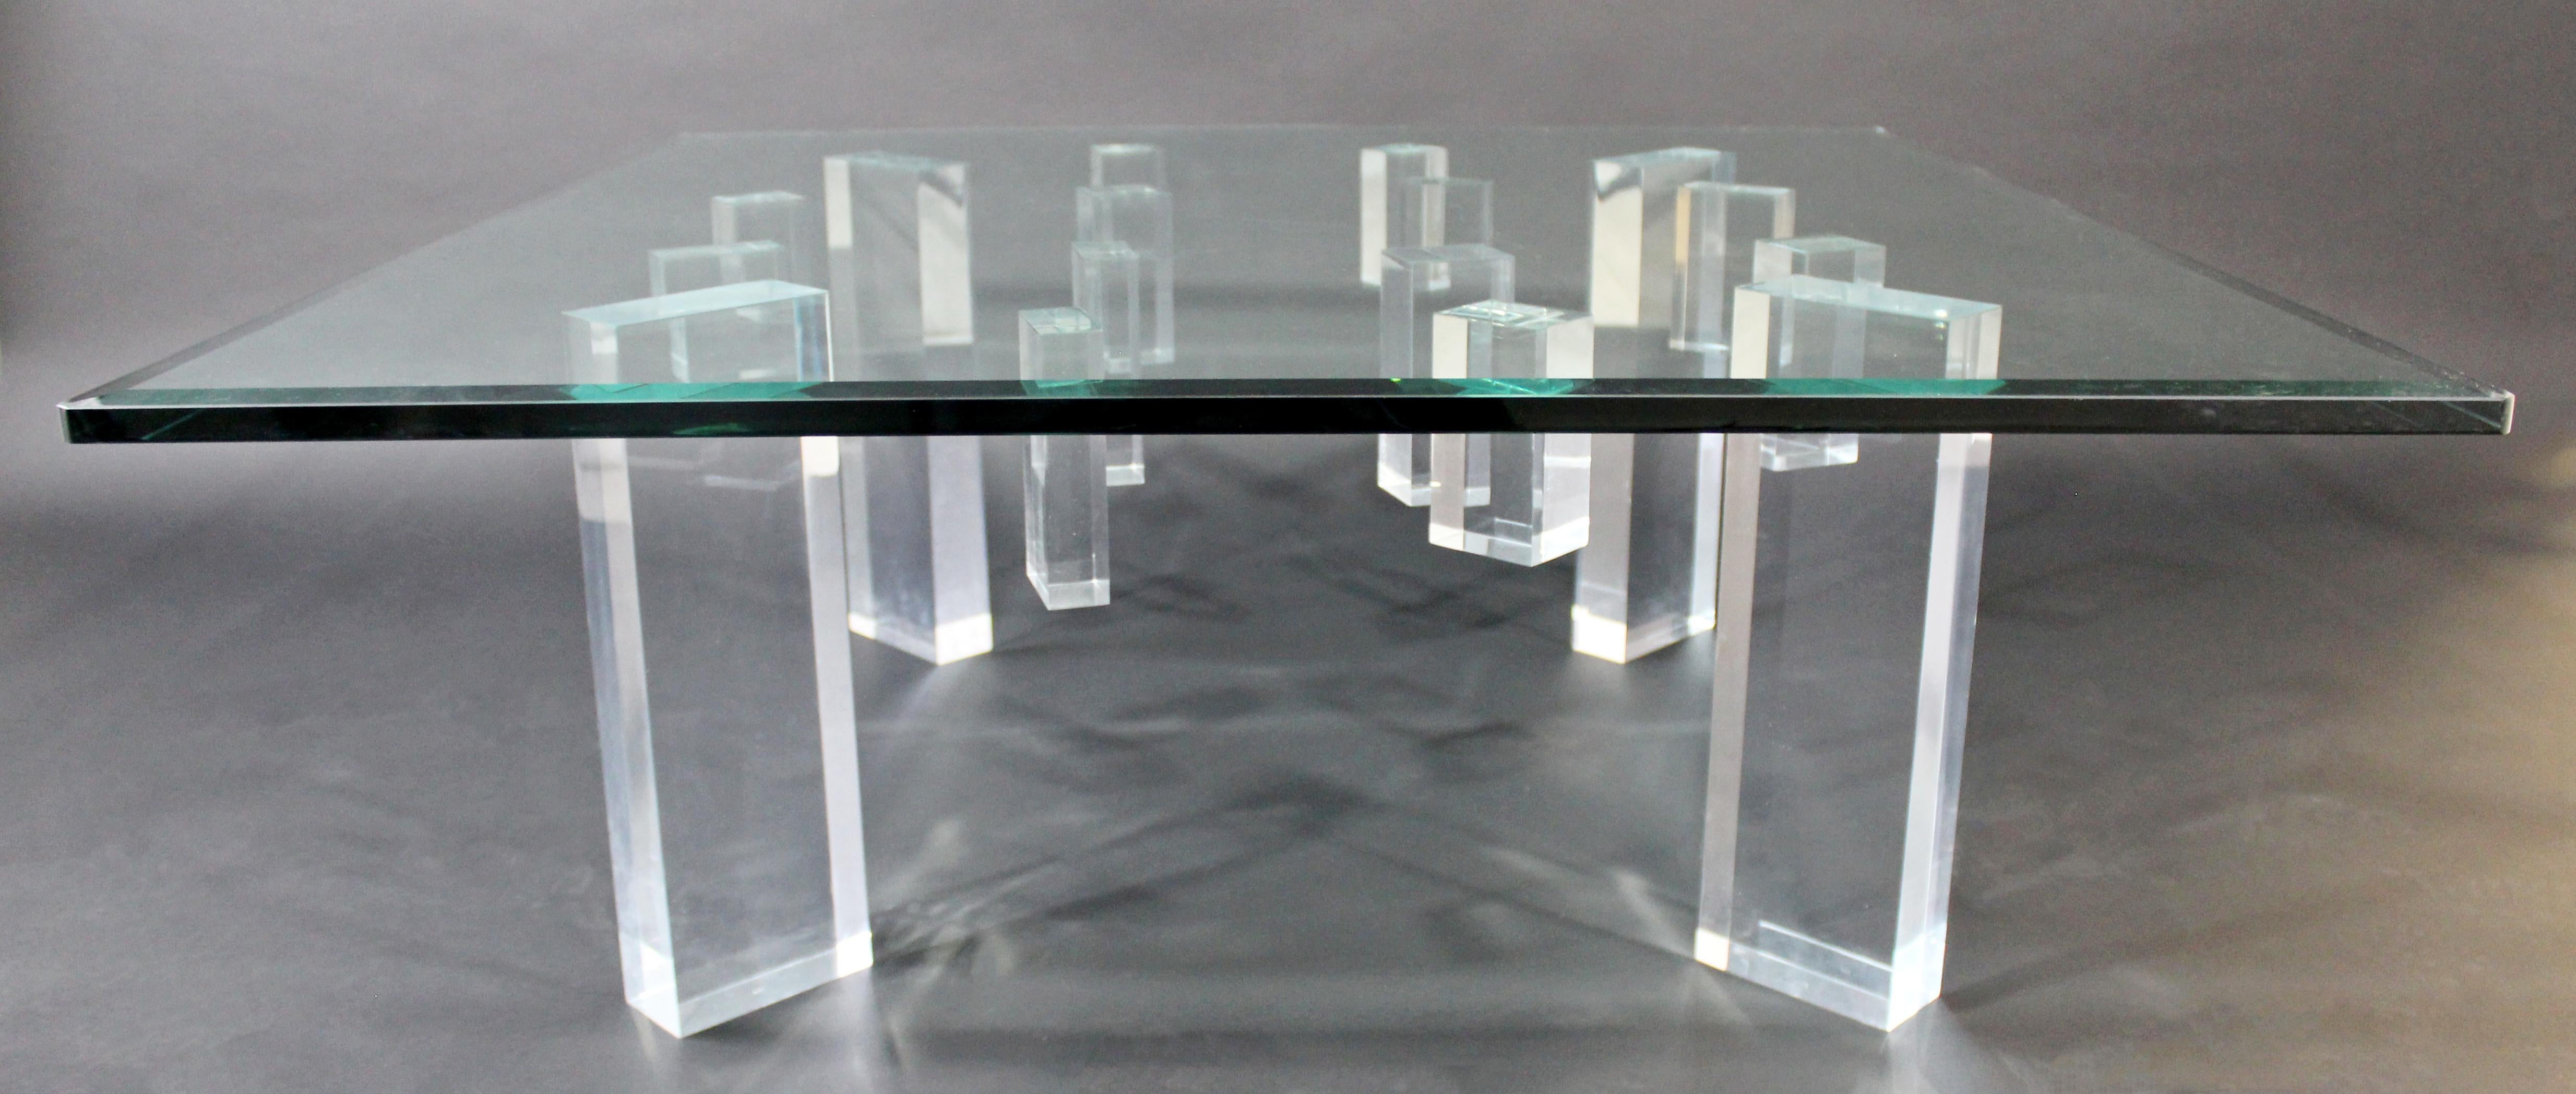 For your consideration is a spectacular, square glass topped coffee table, on Lucite acrylic legs, circa 1980s. In very good vintage condition. The dimensions are 42